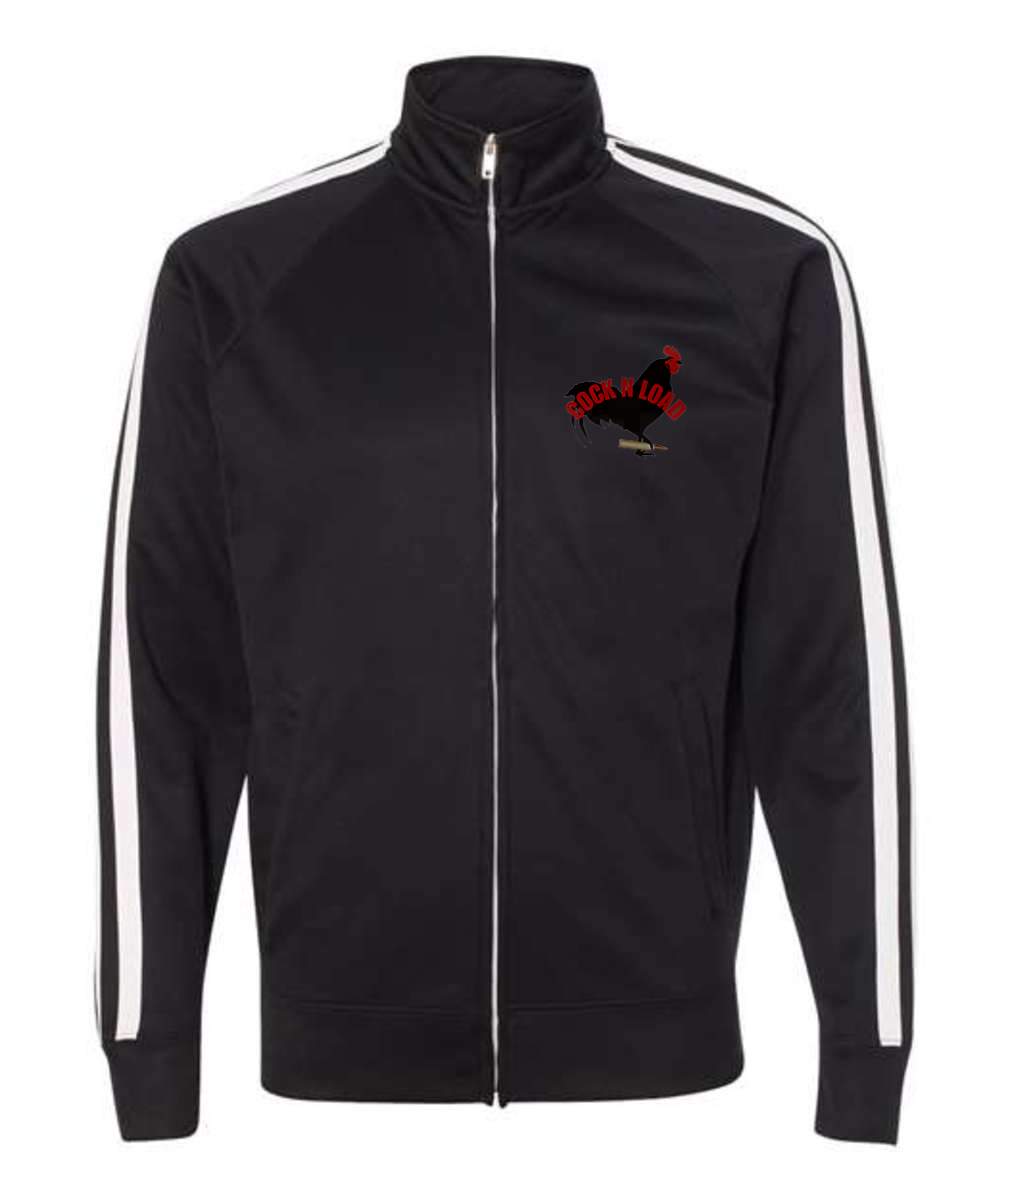 Cock n load 2Embroidered Independent Trading Co. - Unisex Lightweight Poly-Tech Full-Zip Track Jacket or Similar